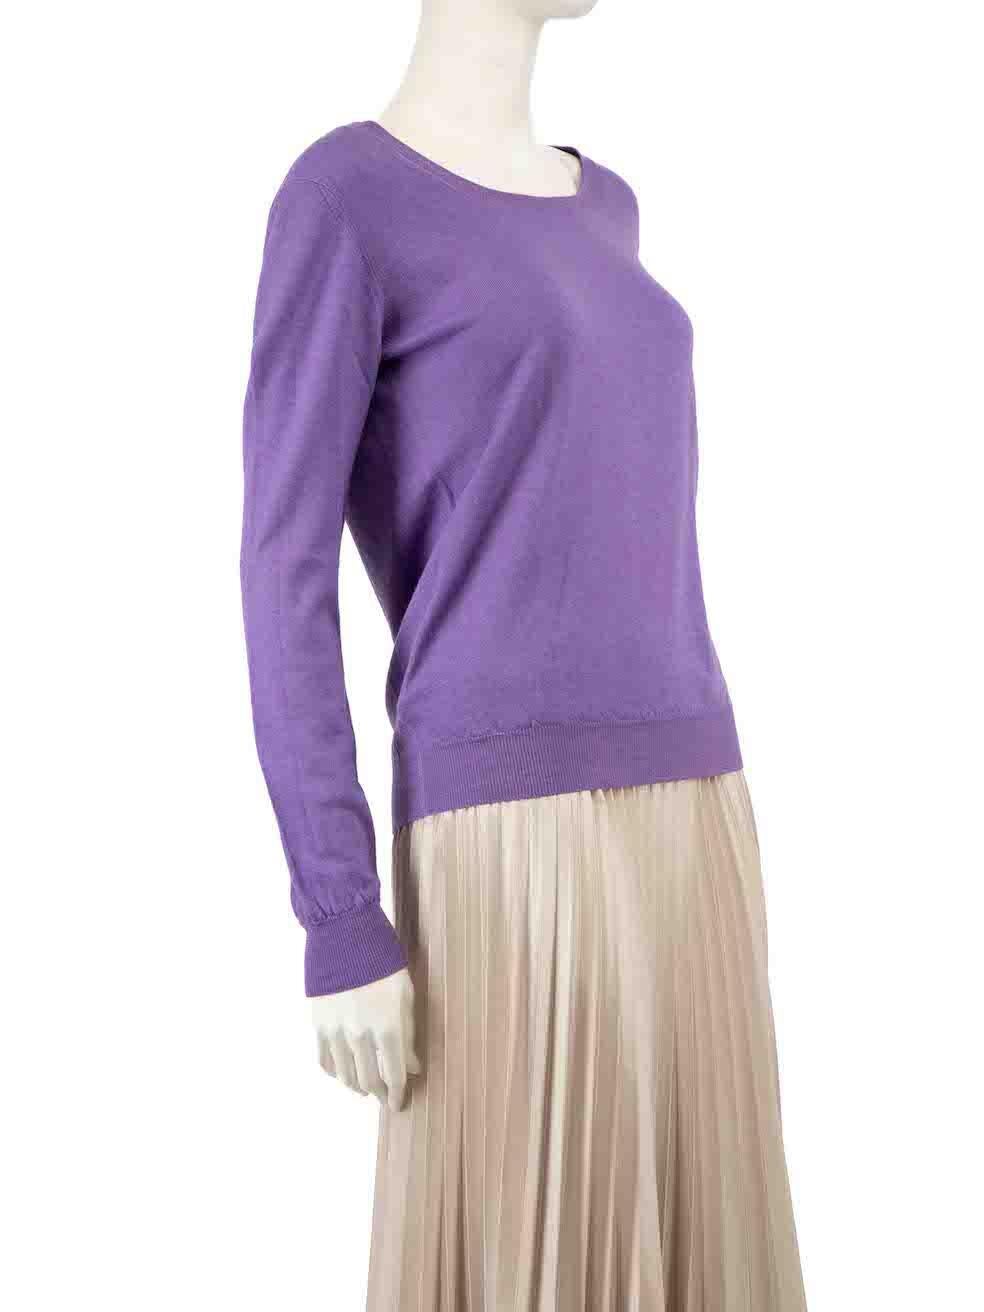 CONDITION is Never worn. No visible wear to jumper is evident on this new Prada designer resale item.
 
 
 
 Details
 
 
 Purple
 
 Wool
 
 Jumper
 
 Long sleeves 
 
 Knitted and stretchy
 
 Round neckline
 
 
 
 
 
 Made in China
 
 
 
